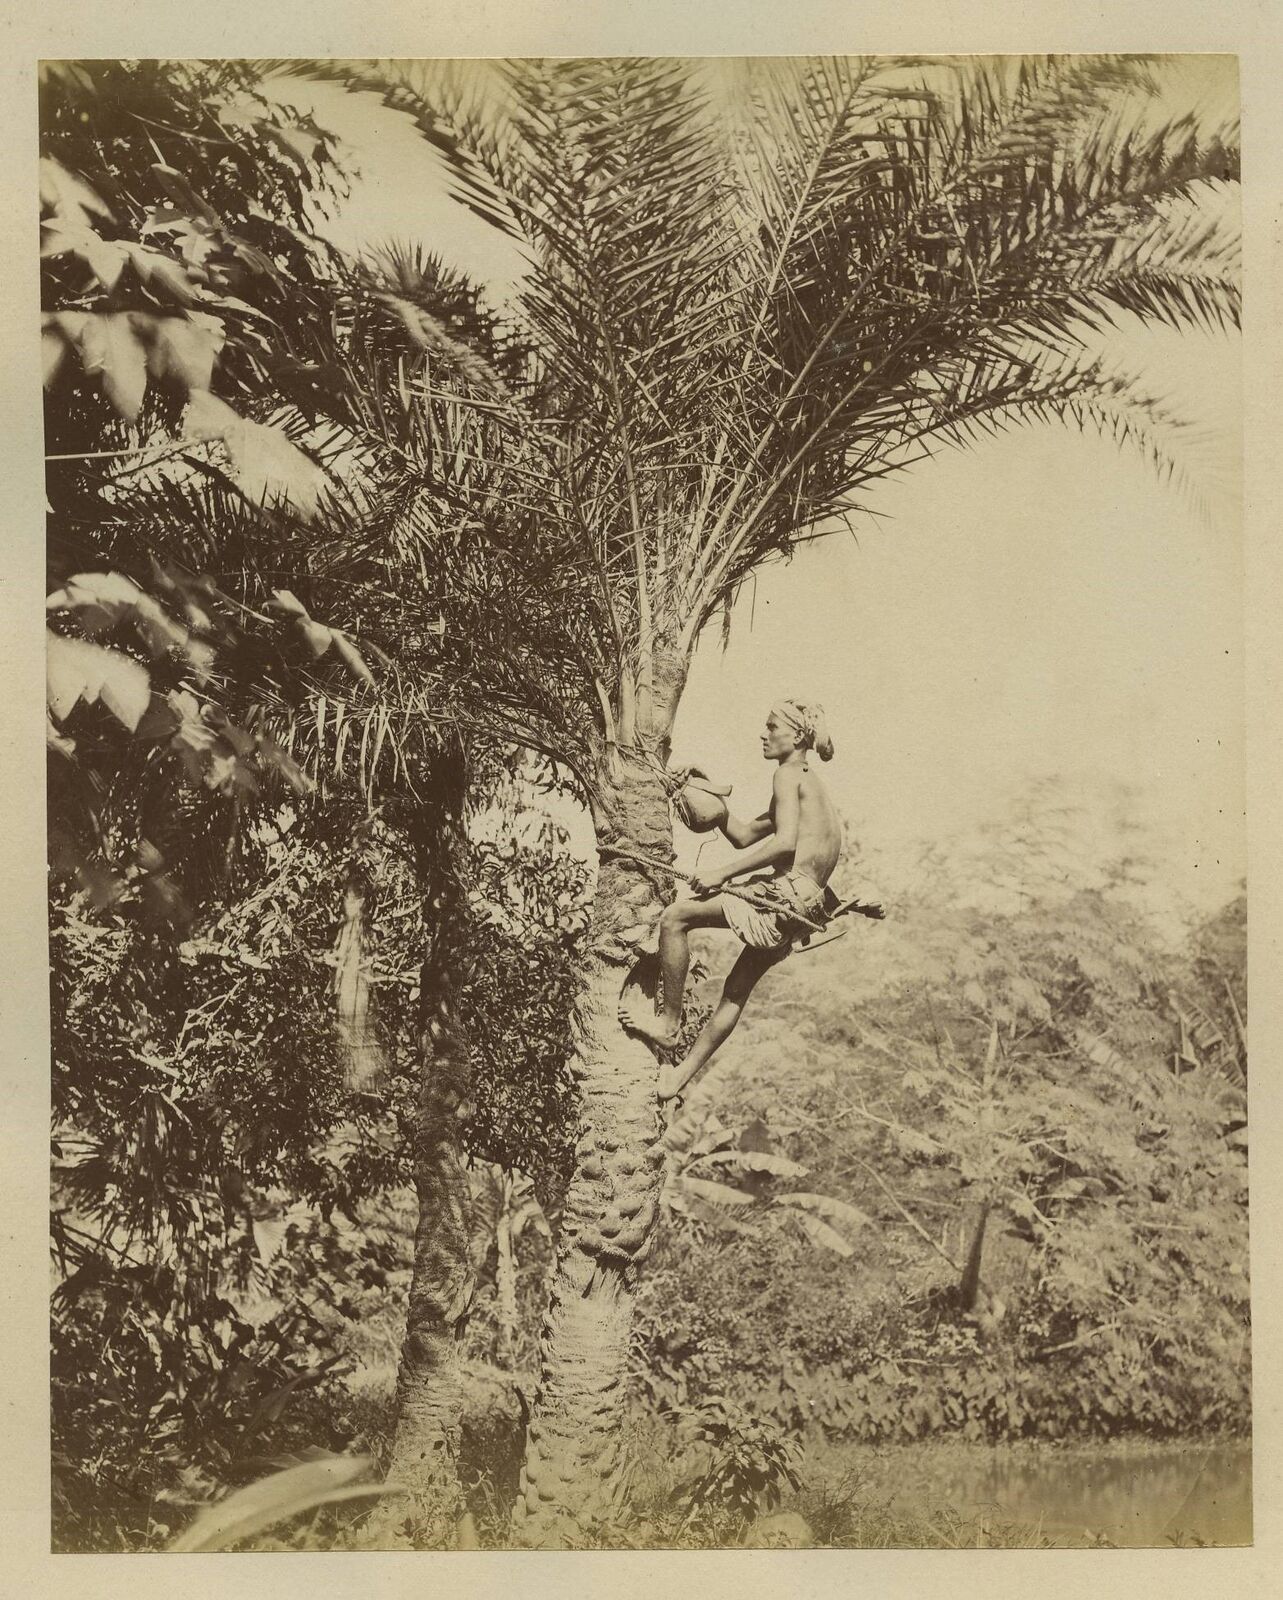 Man From Lower Bengal Drawing Sap From Palm Tree India c1880s Photo